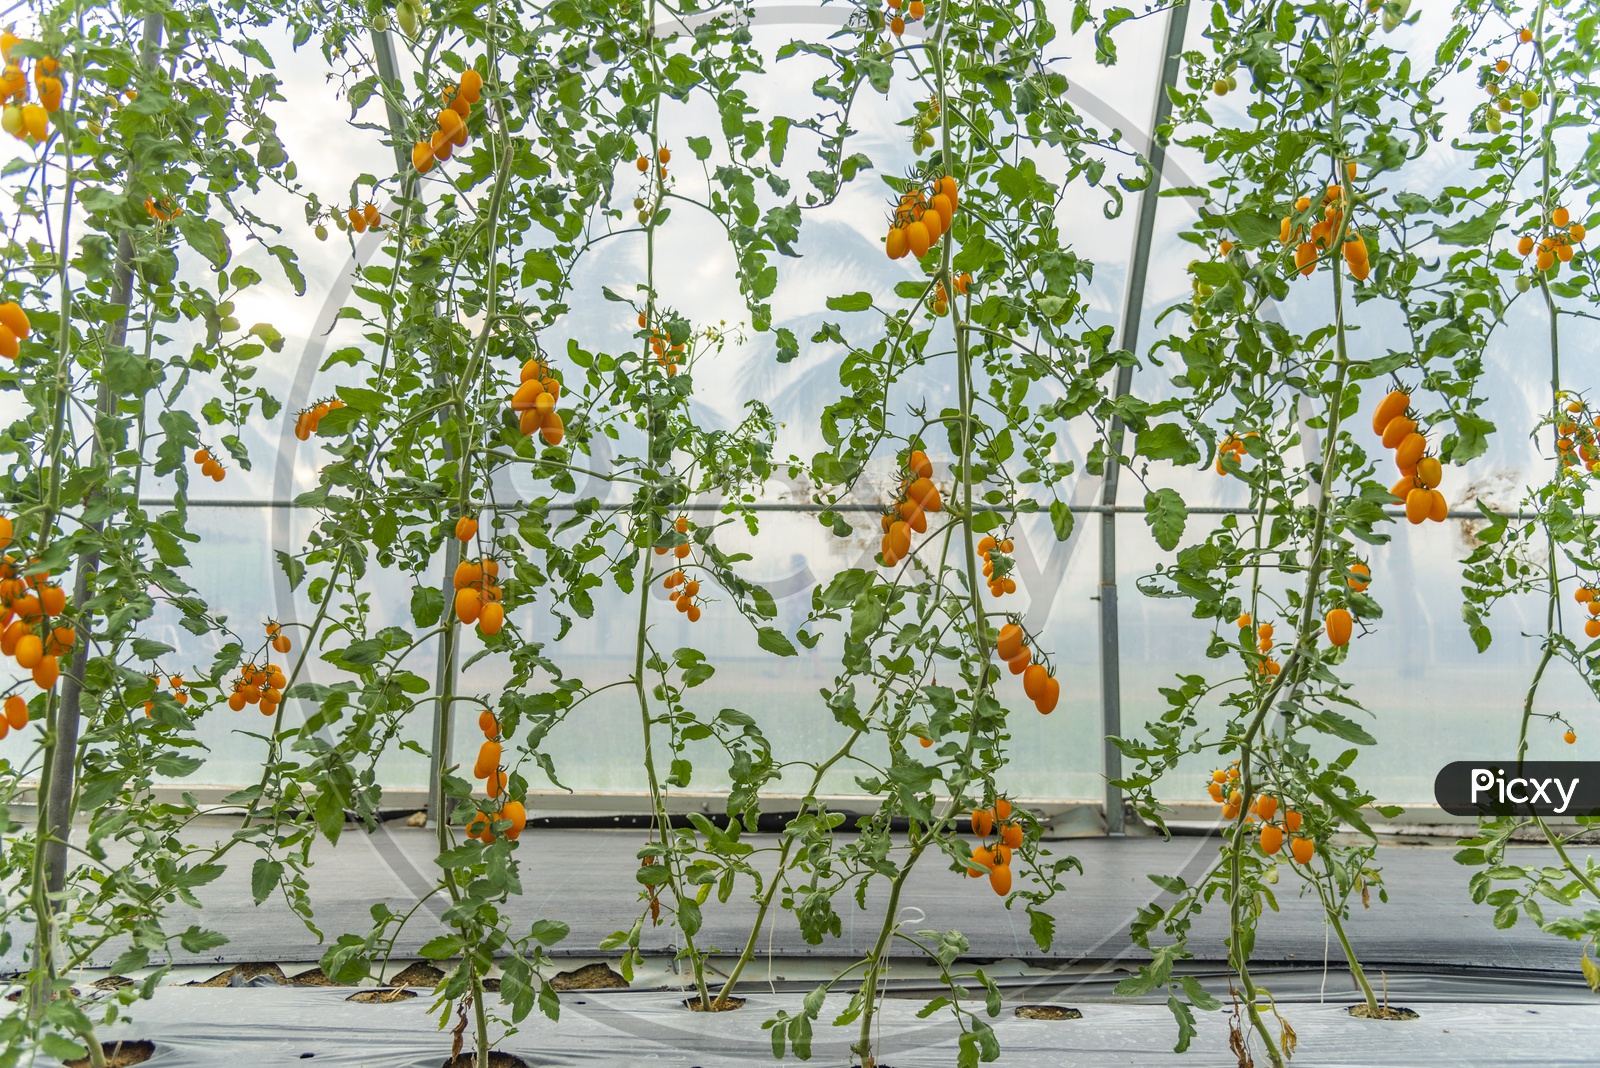 Tomato Cultivation In Greenhouses , Tomatoes Grown In House of Modern Agricultural Technology Systems